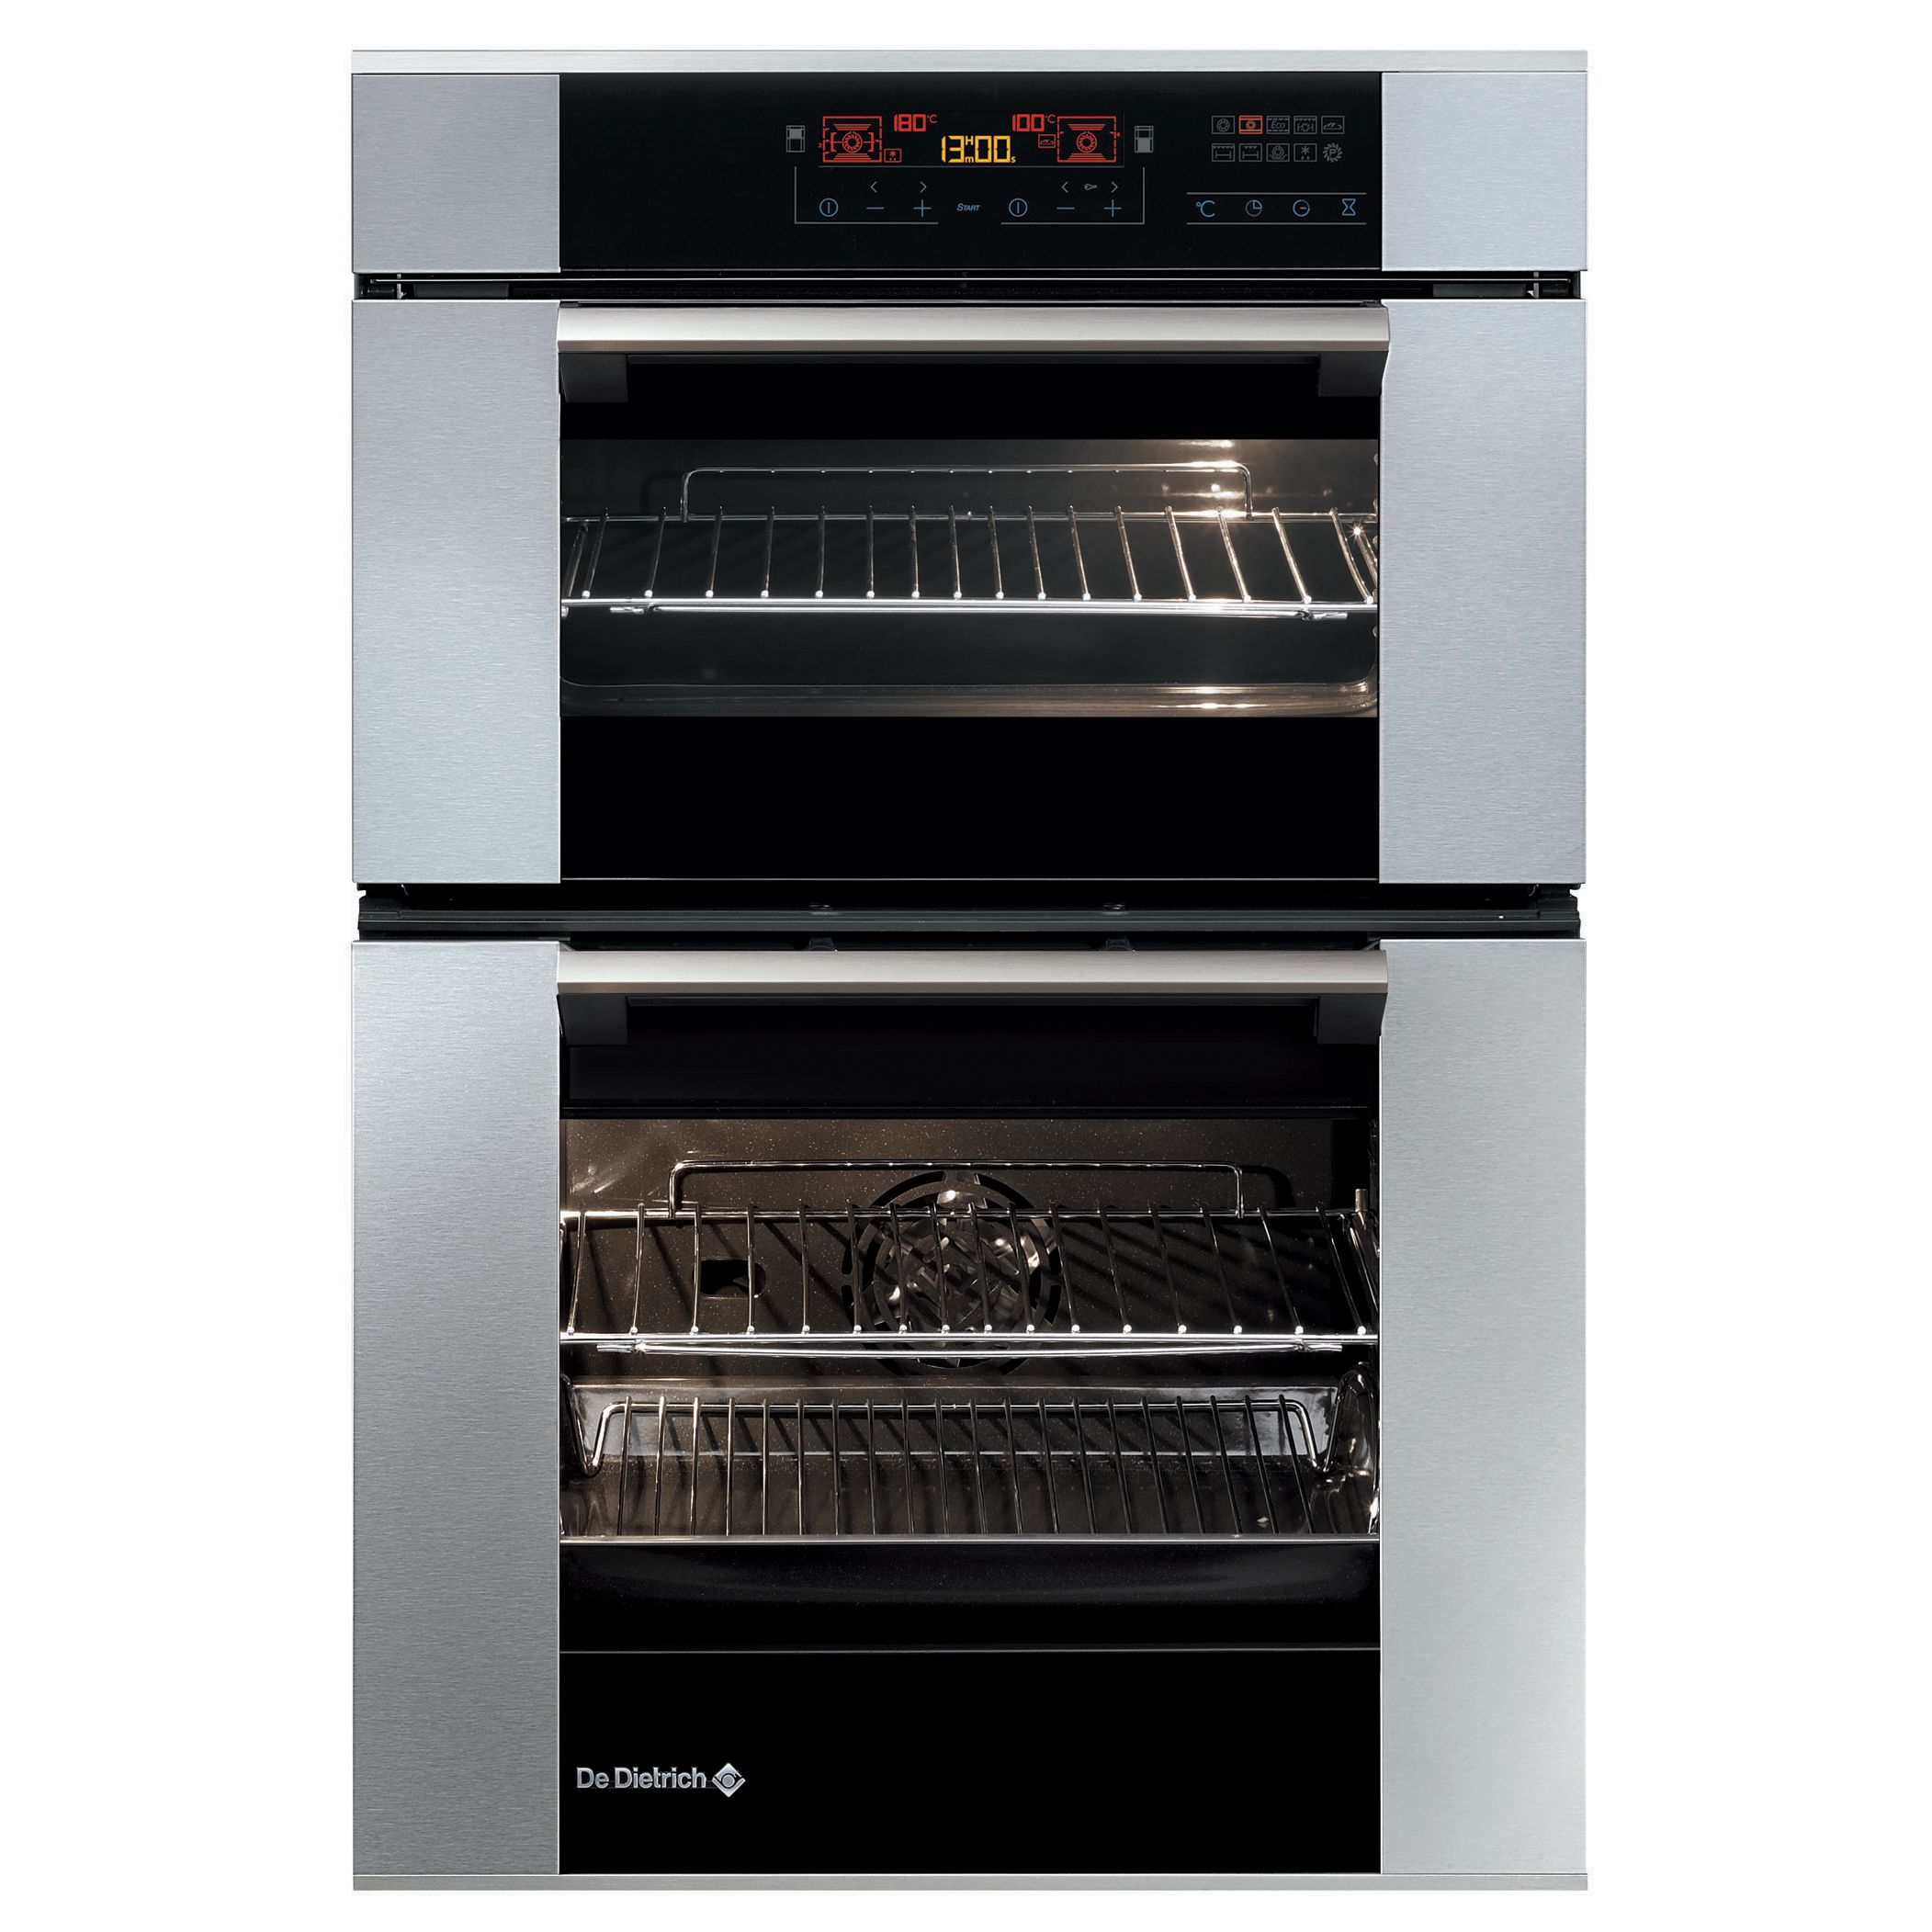 De Dietrich DOD788X Double Electric Oven, Stainless Steel at John Lewis